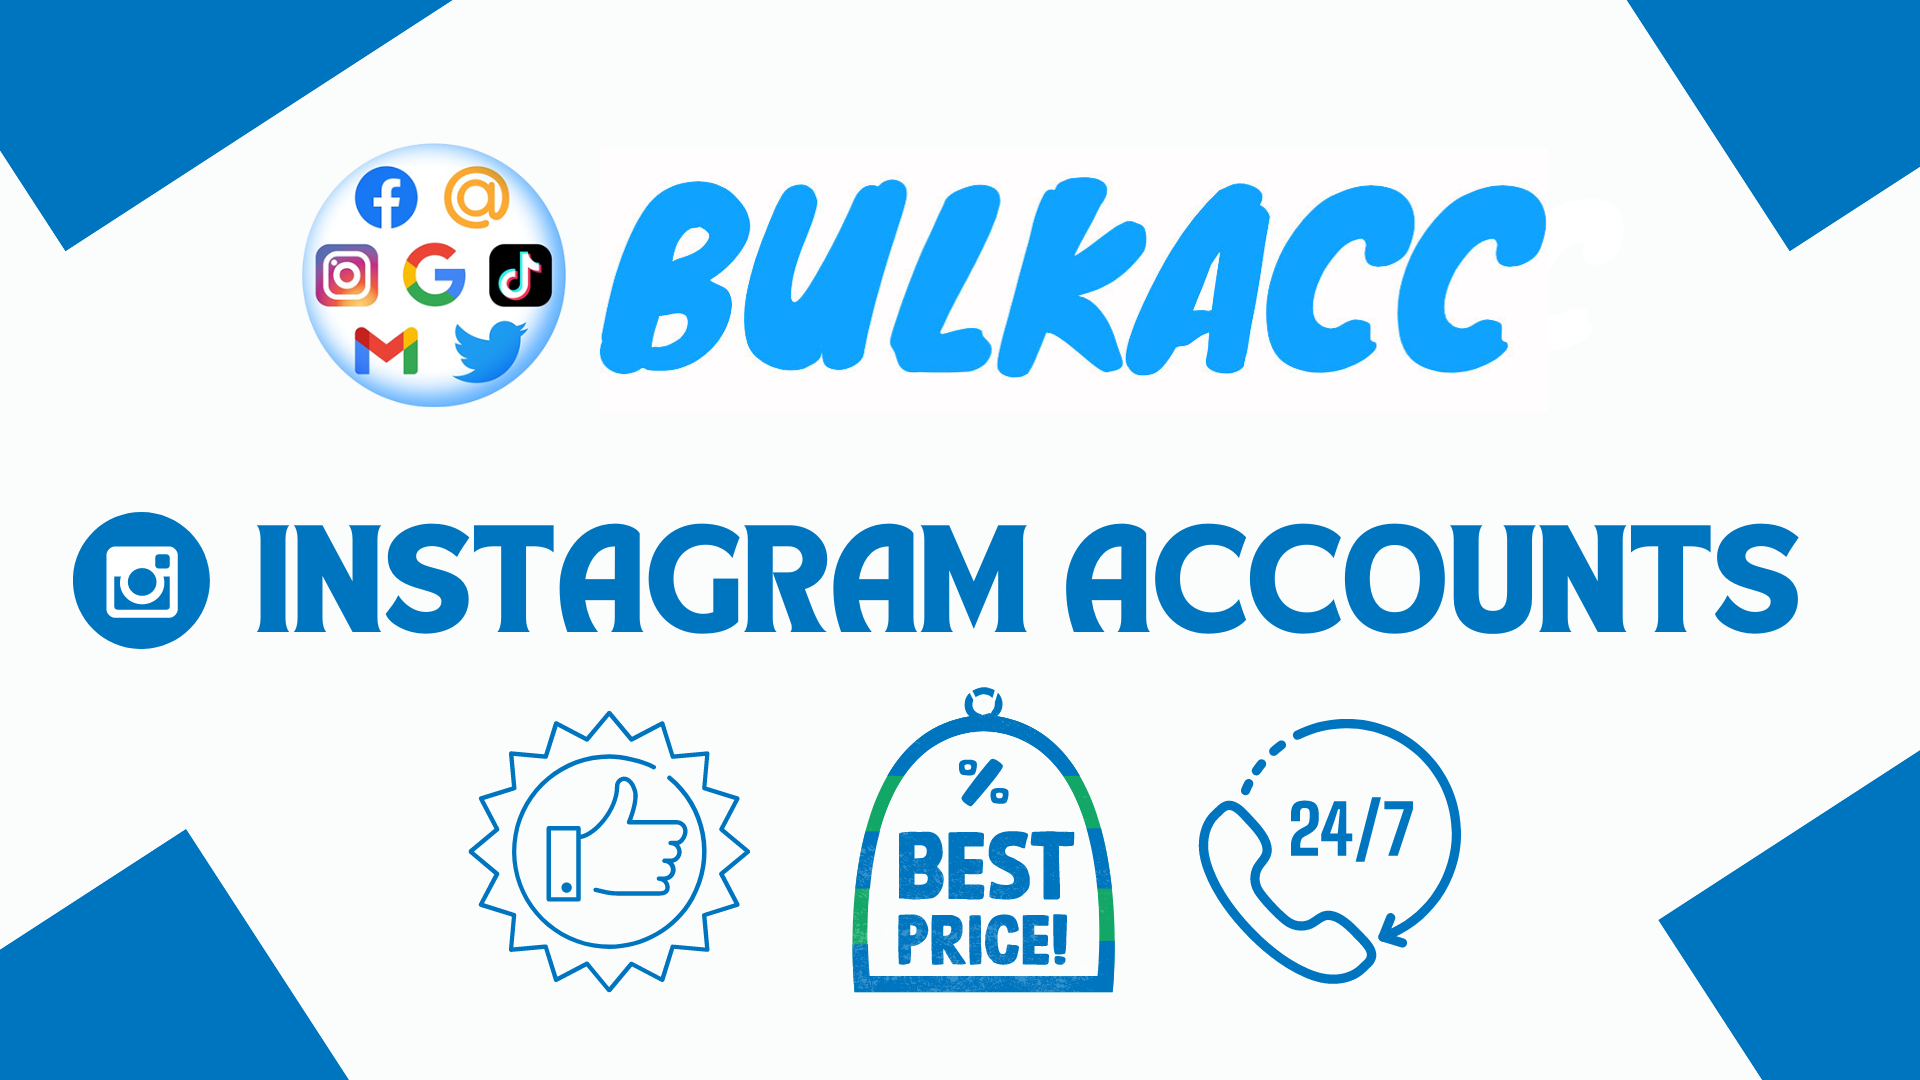 Buying bulk Instagram accounts brings various advantages, whether you're a business owner, influencer, or marketer. Bulkacc.com is outstanding as the premier destination for buying Instagram accounts in bulk with high-quality accounts and affordable price